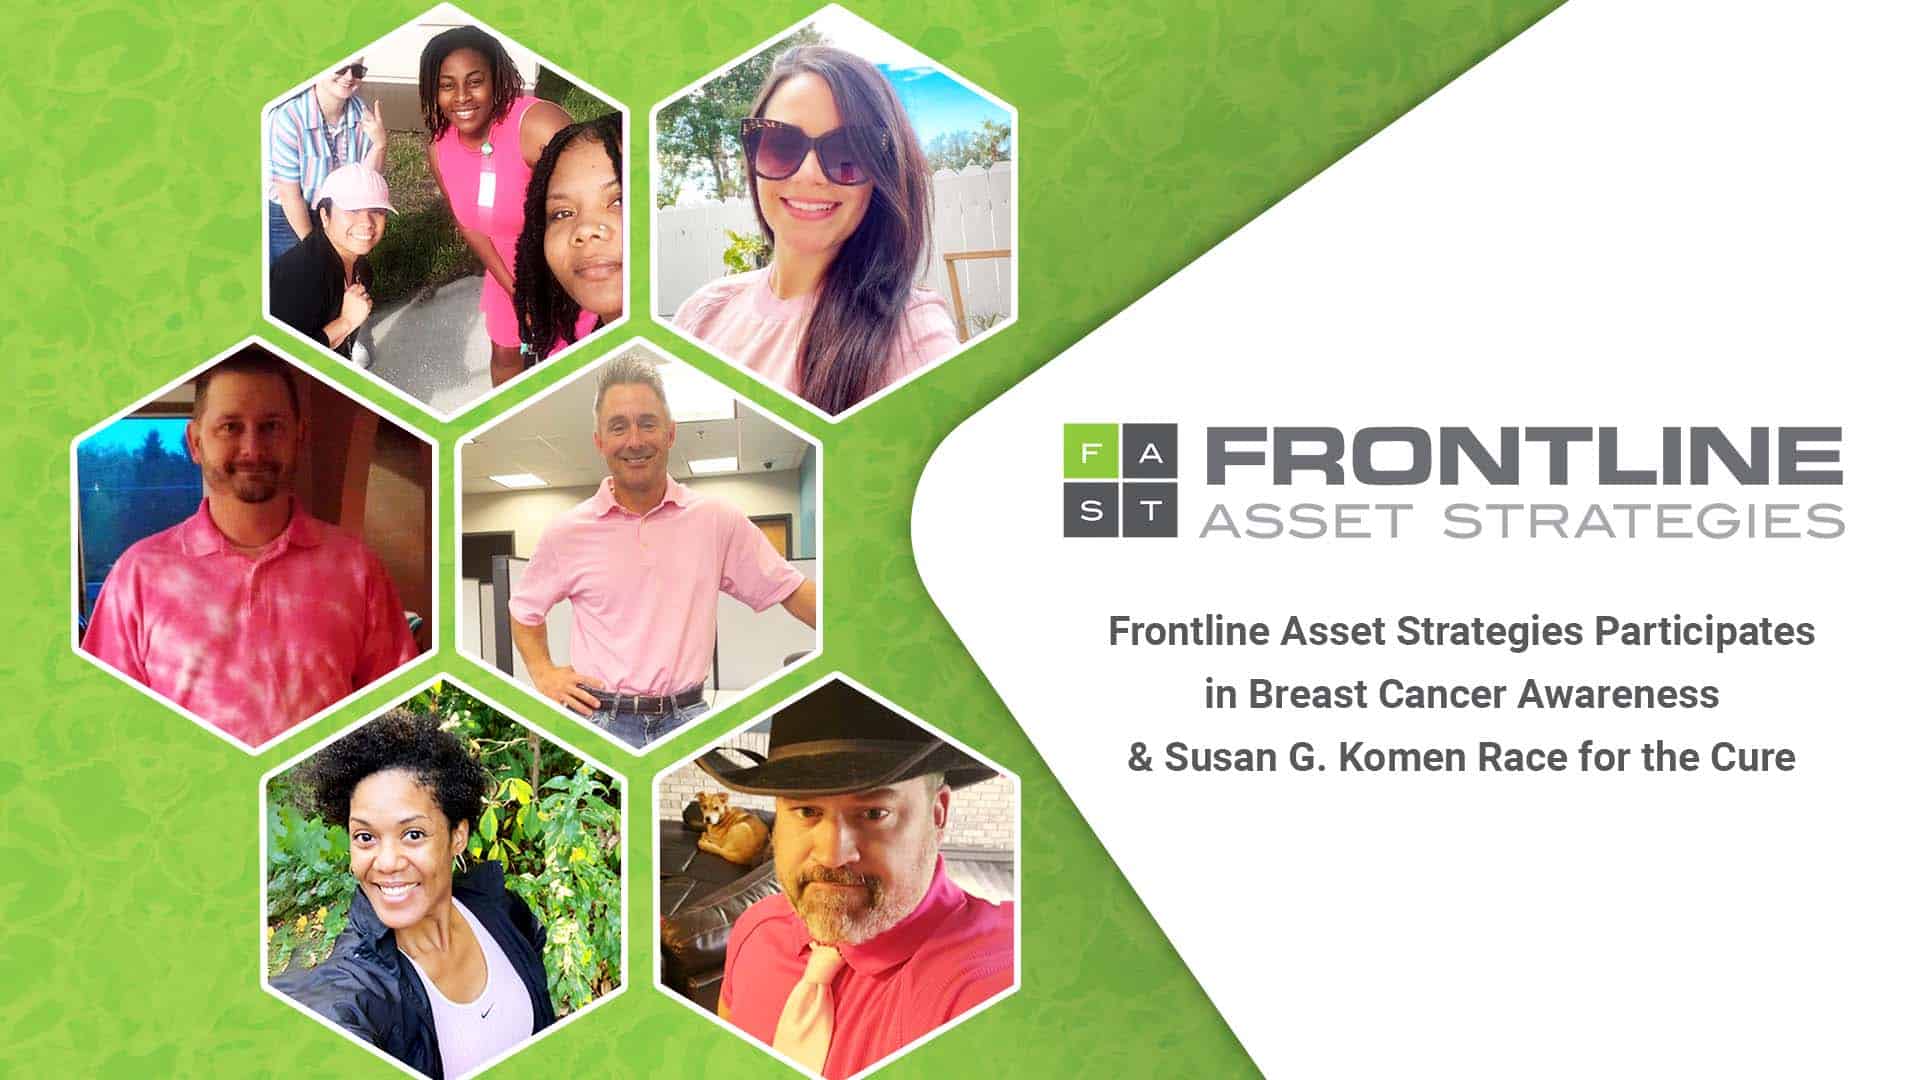 Company employees wearing pink for Breast Cancer Awareness